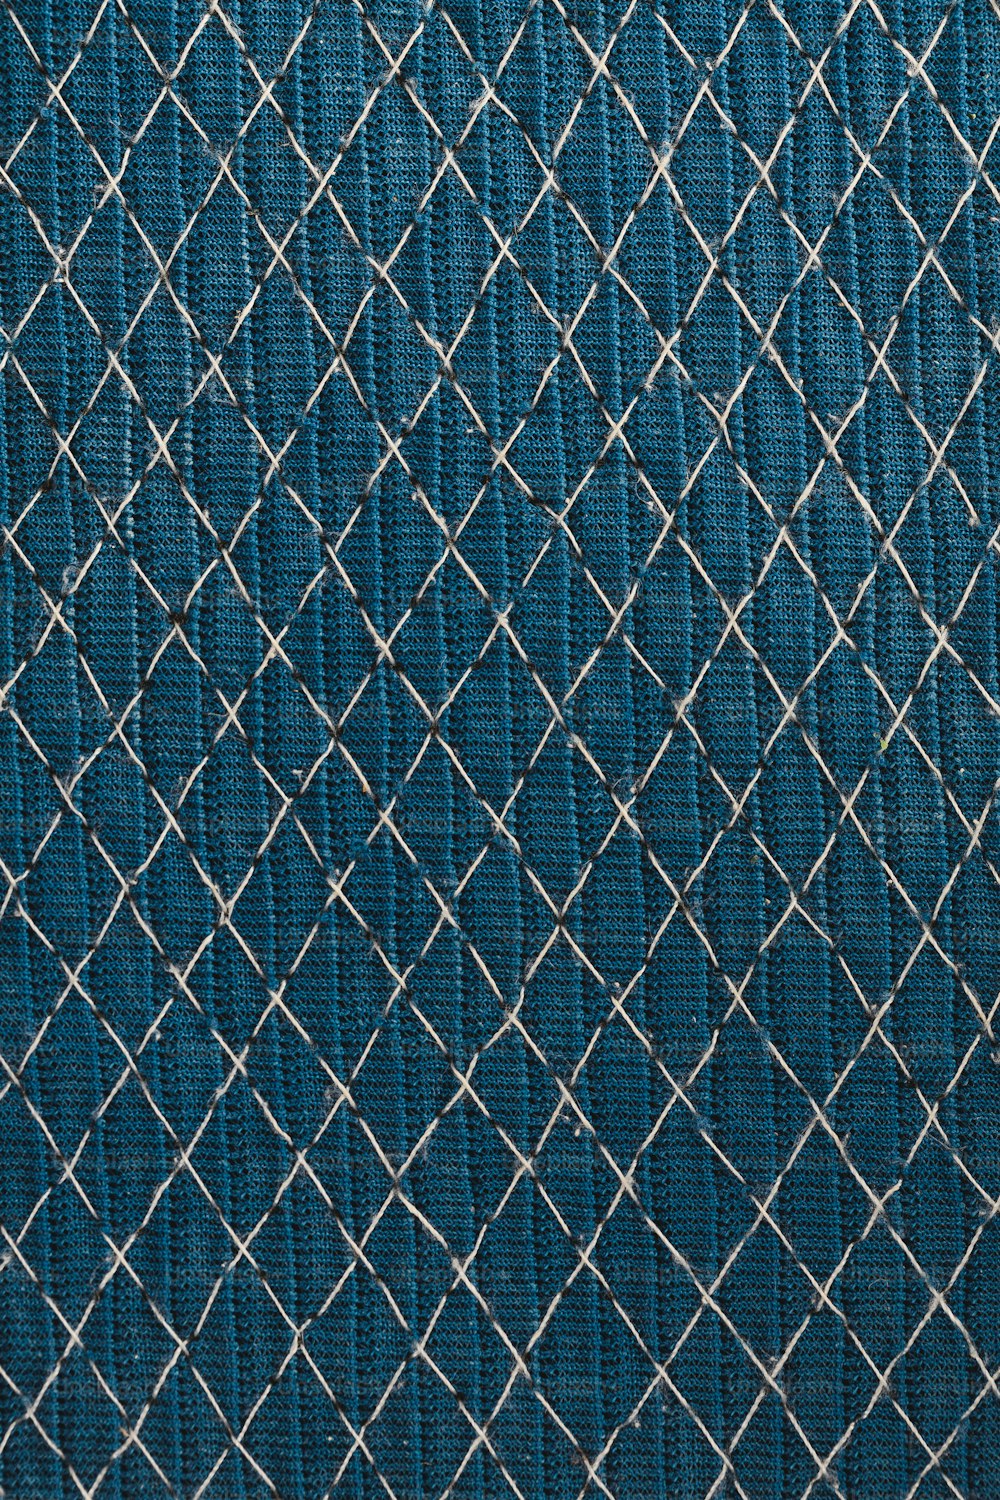 a close up of a blue fabric with a diamond pattern